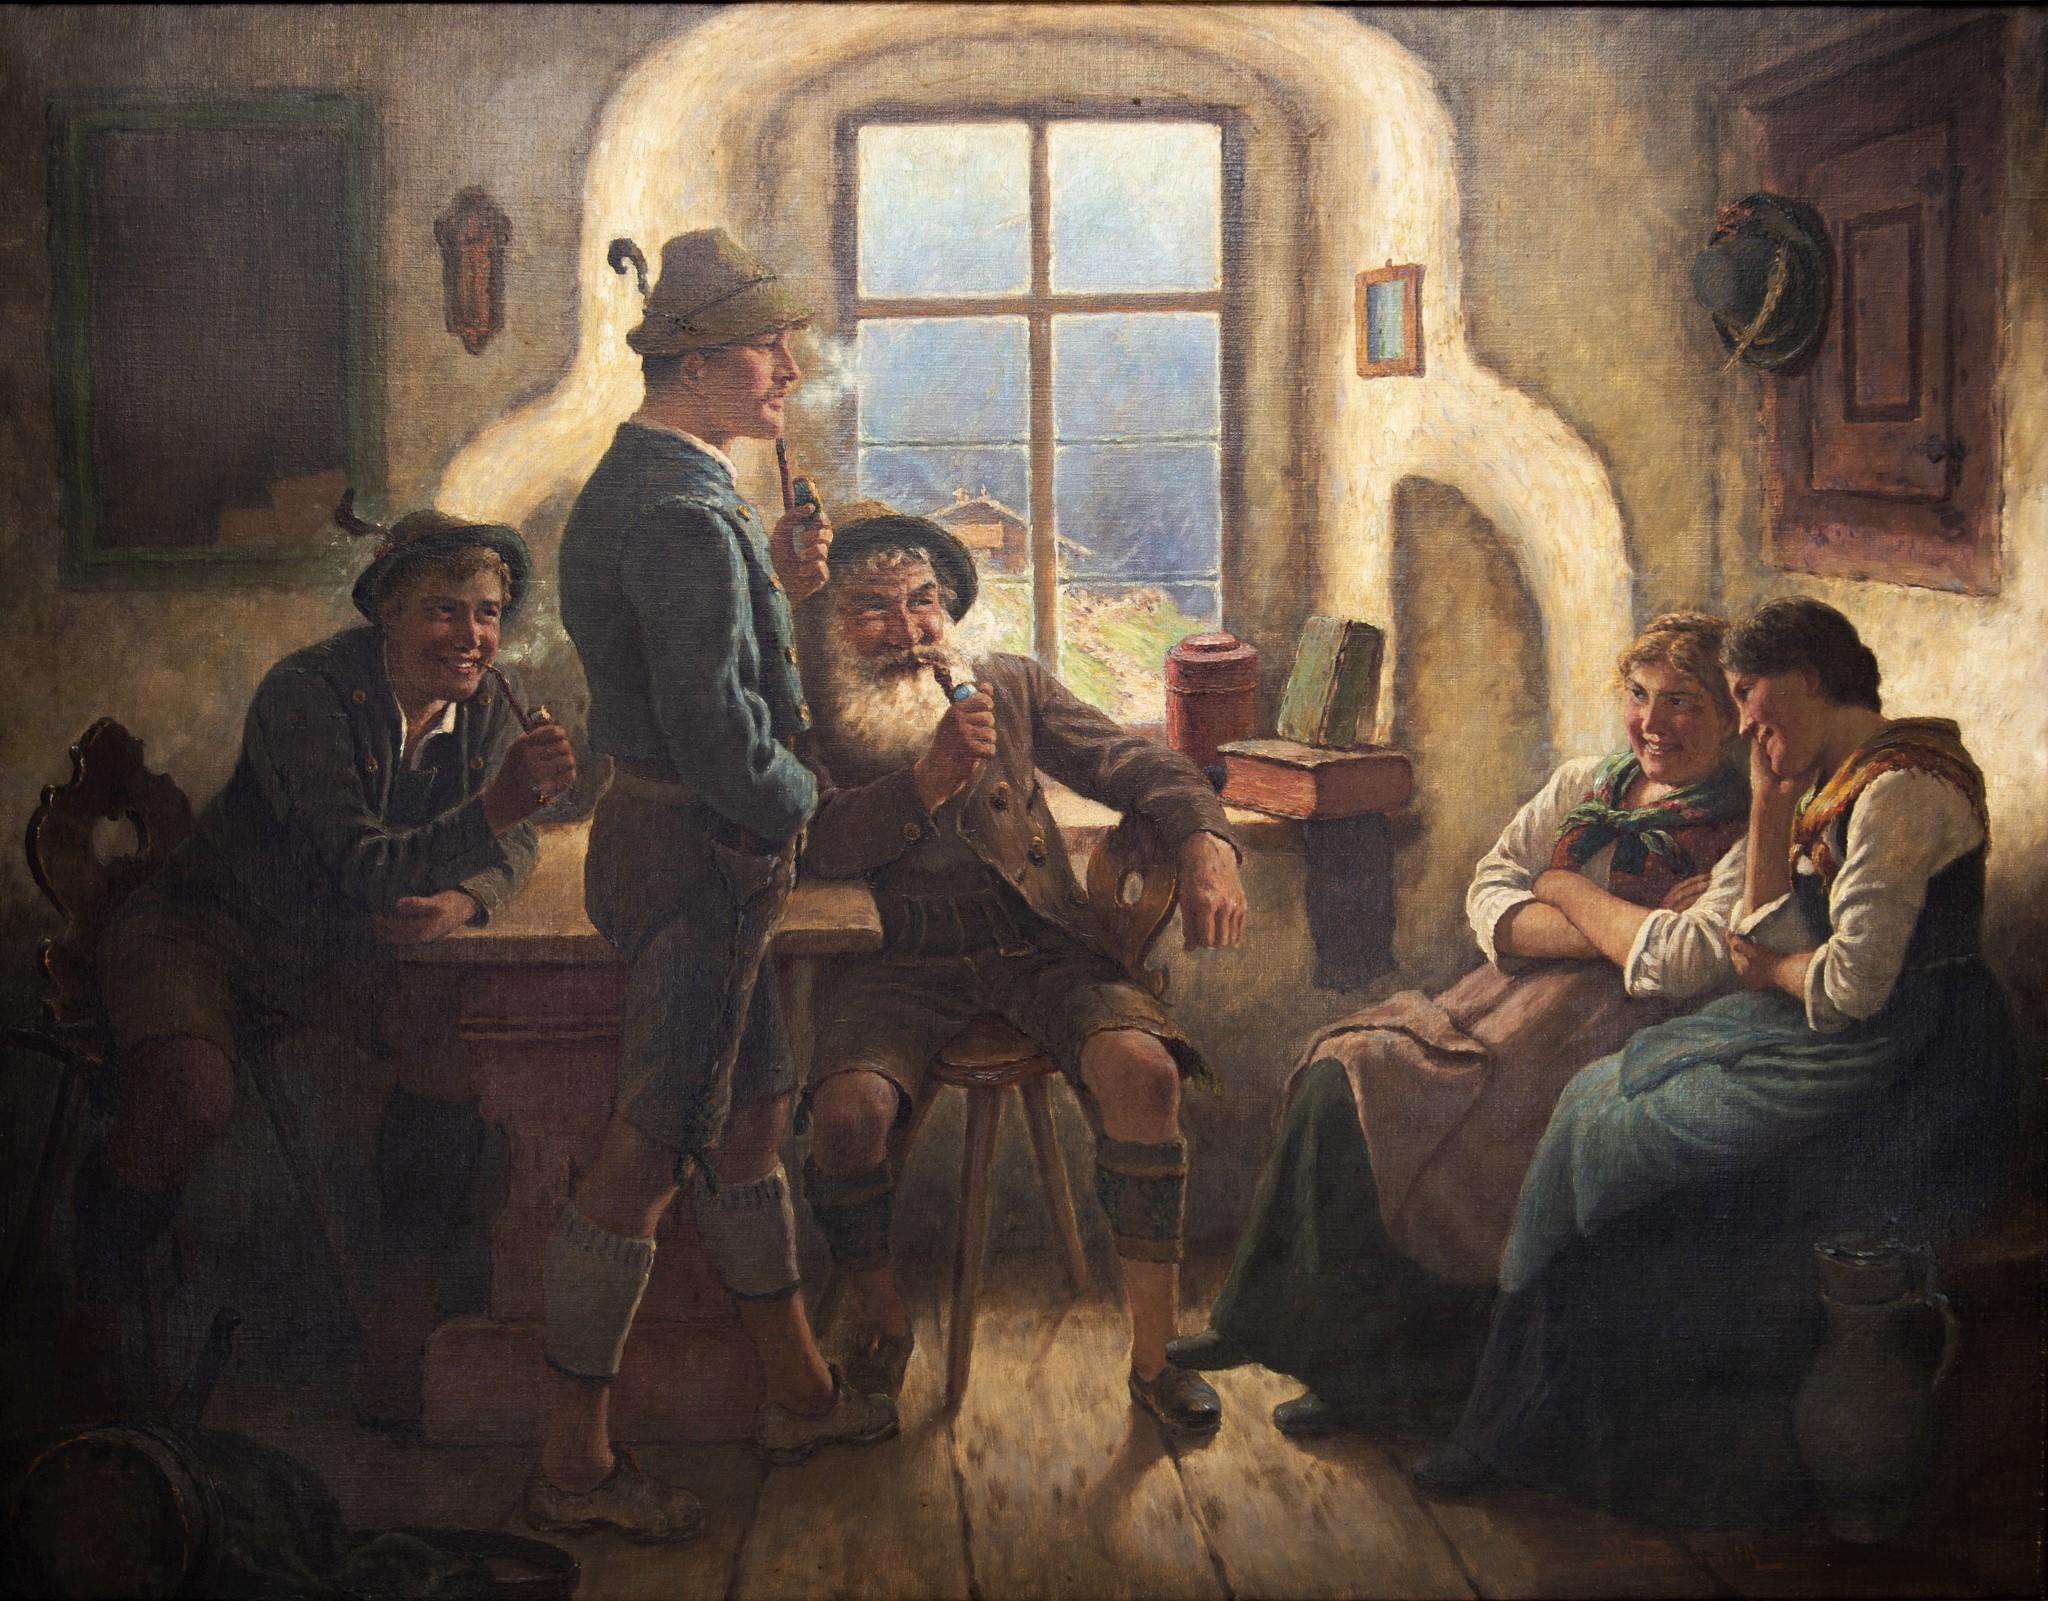 Large framed oil on canvas depicting a Bavarian tavern scene by German painter Maximilian Wachsmuth (1859-1912). This German tavern scene captures the period and flavor of Bavarian townsfolk in the late 1800s dressed in traditional Alpine tracht.